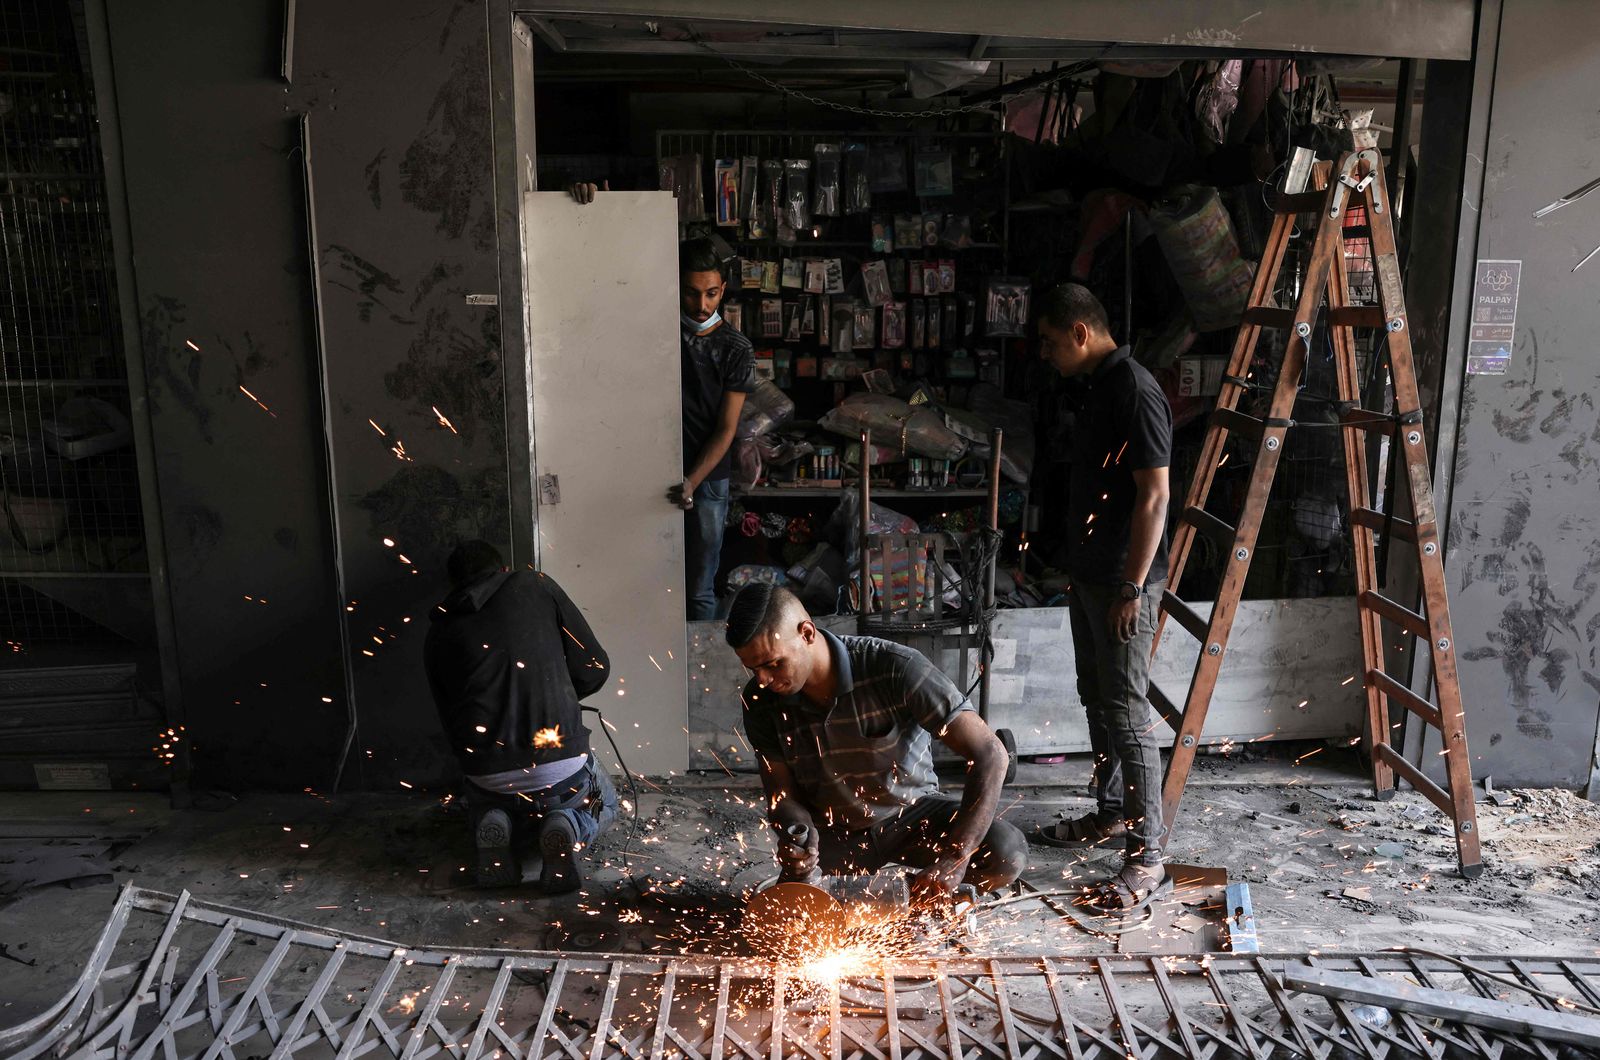 Palestinian labourers fix a damaged store at a shopping center, next to a building that was hit by an Israeli strike, in Gaza City on May 22, 2021. (Photo by MAHMUD HAMS / AFP) - AFP